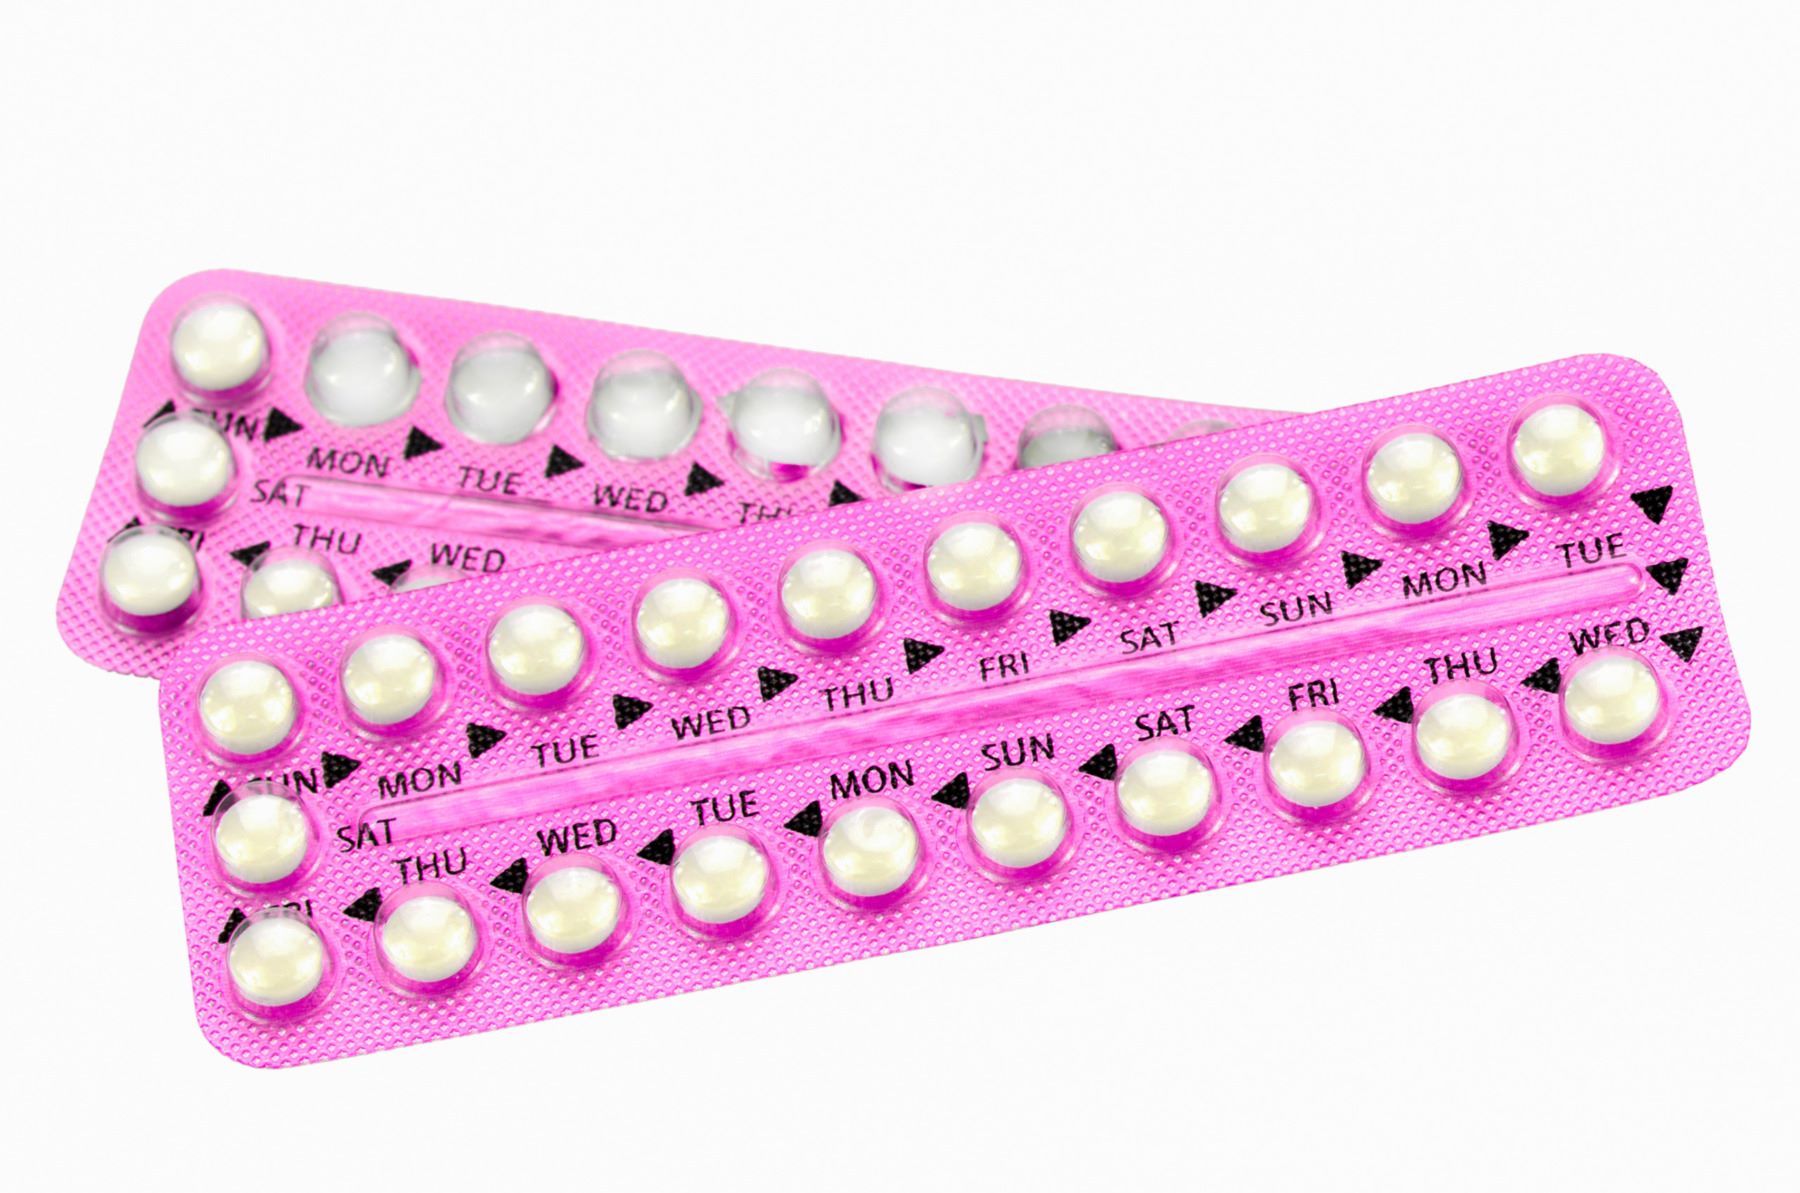 hormonal birth control pills can cause oily strands